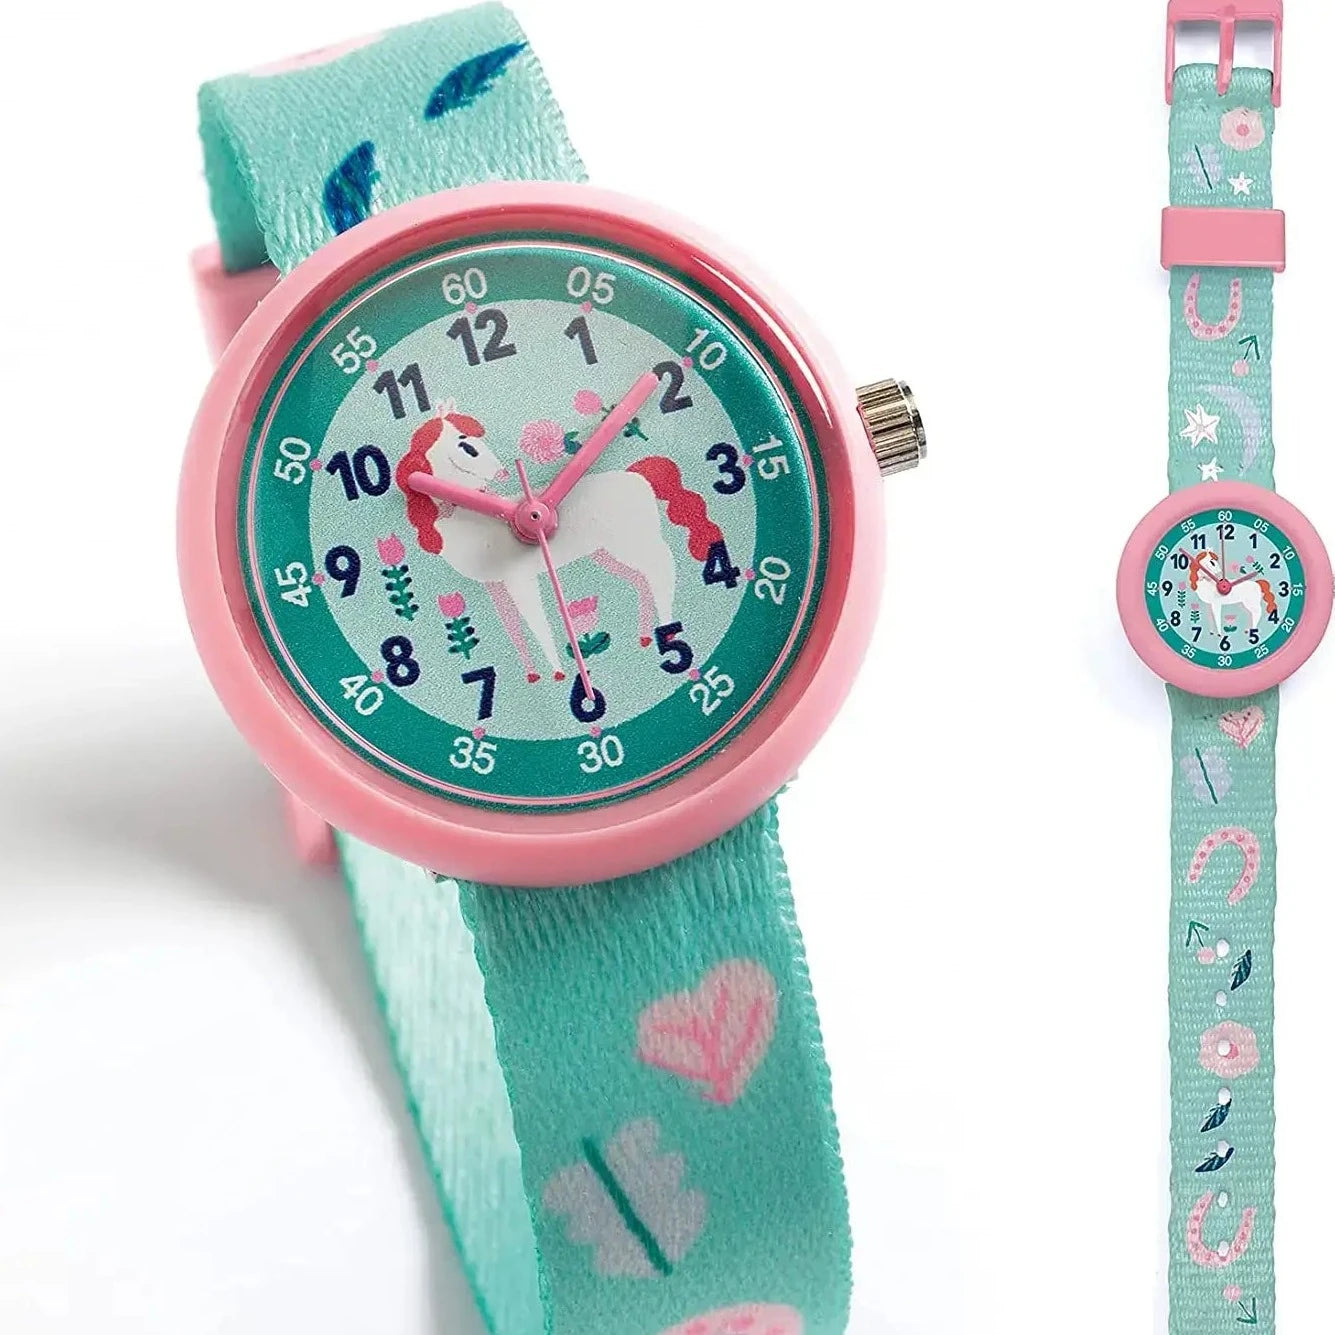 Ticlock Horse Children's Learning Educational Watch